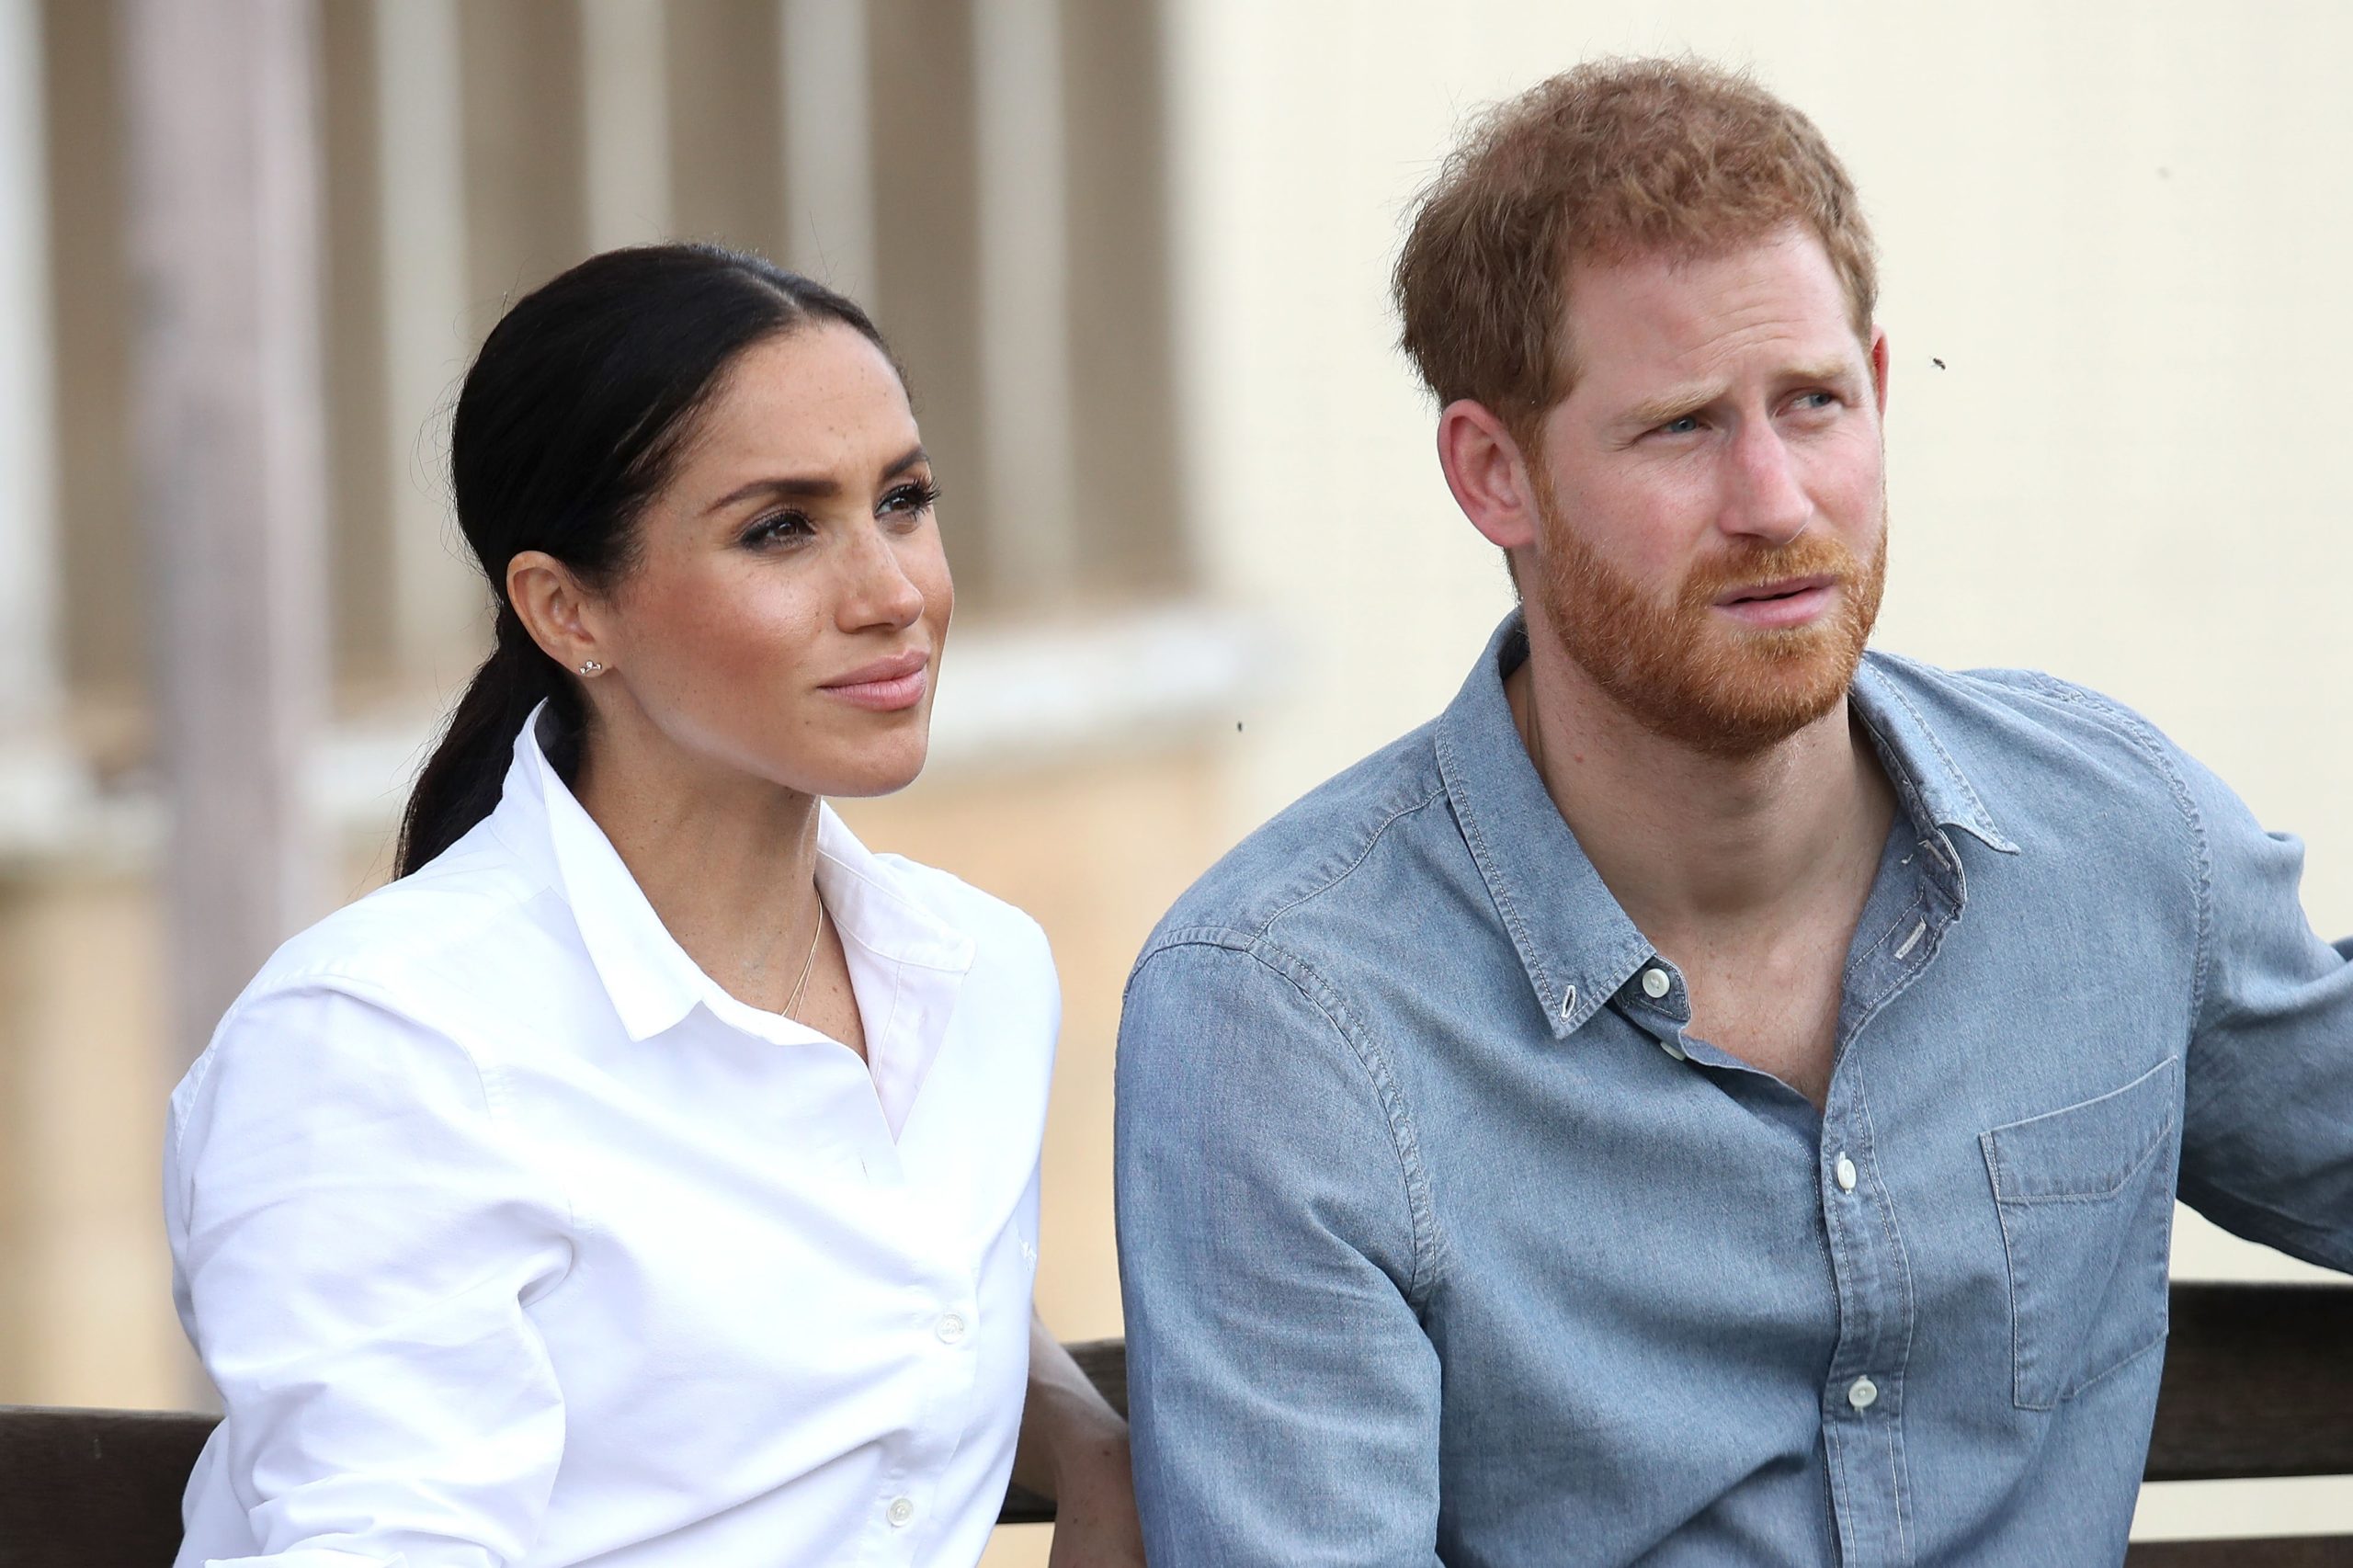 Prince Harry And Meghan Markle Being Sued By Queen Elizabeth For Millions!